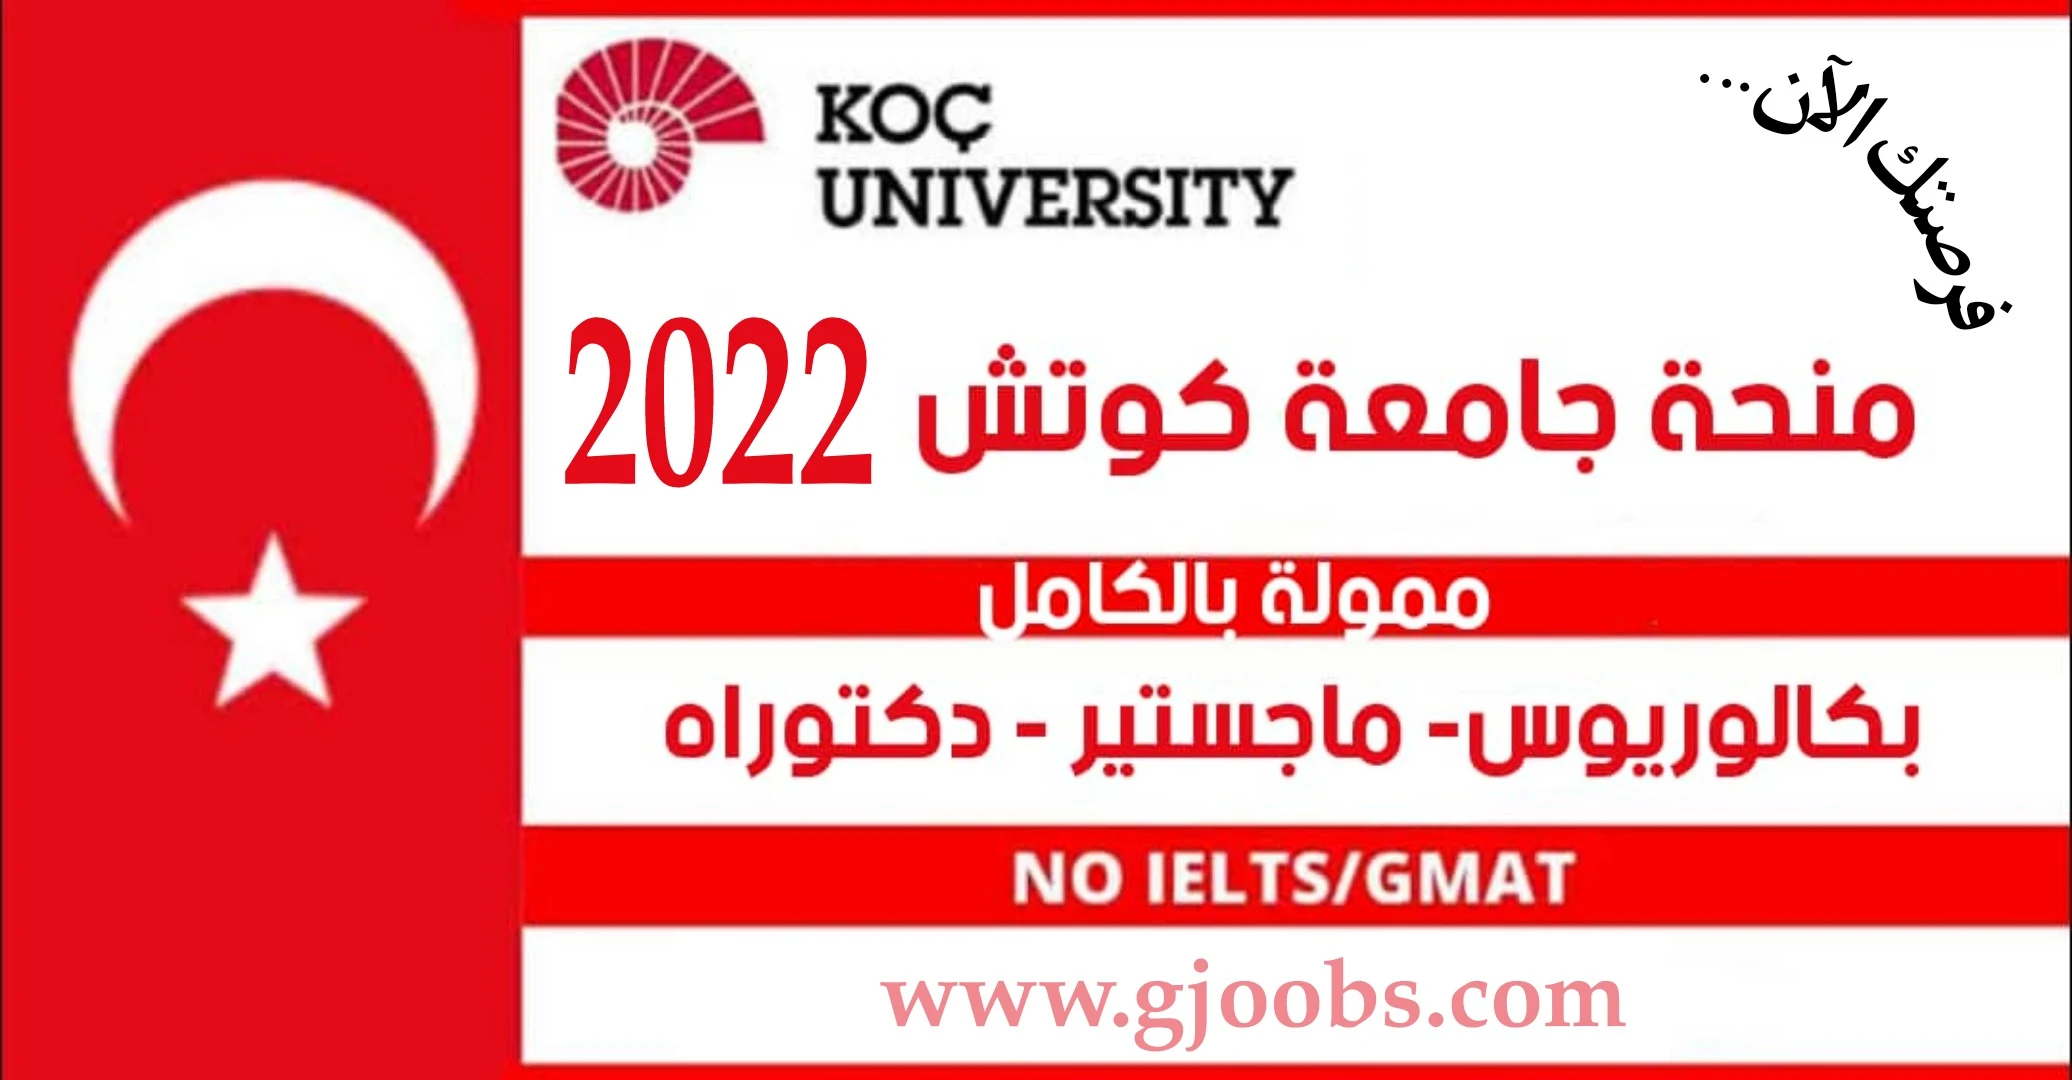 Koç University Scholarship To Study Bachelor’s, Master’s, And Doctoral Degrees In Turkey | Fully Funded